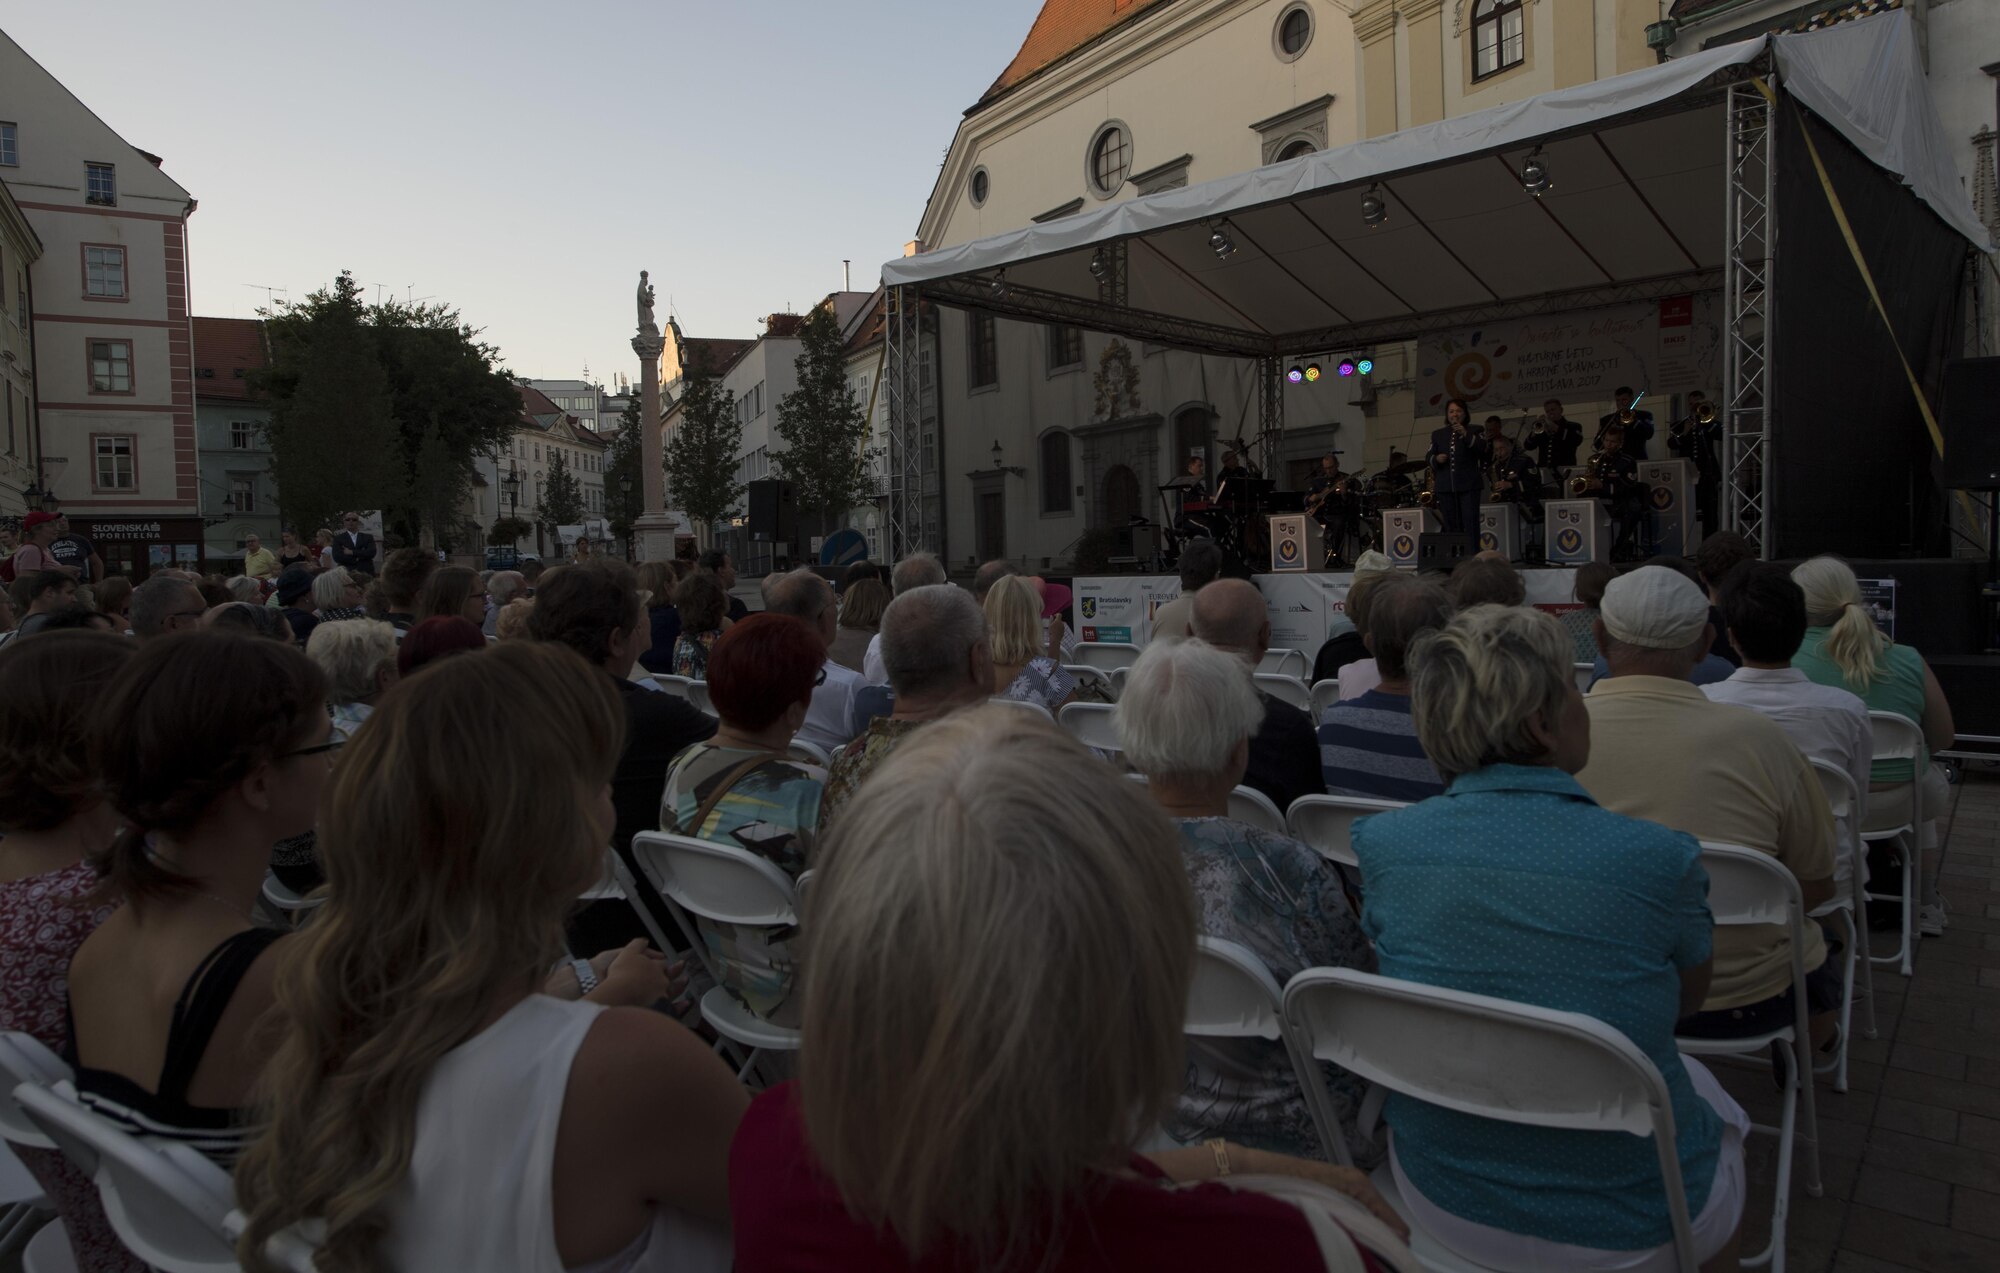 Members of The Ambassadors, U.S. Air Forces in Europe jazz band, perform before an audience for the 73rd anniversary of the Slovak National Uprising in Bratislava, Slovakia, Aug. 30, 2017. The band also played at the Museum of Slovak National Uprising in Banská Bystrica, Slovakia, for the celebration. The USAFE Band’s performance will help preserve the mutual commitment and trust between the U.S. and Slovakia. (U.S. Air Force photo by Senior Airman Tryphena Mayhugh)